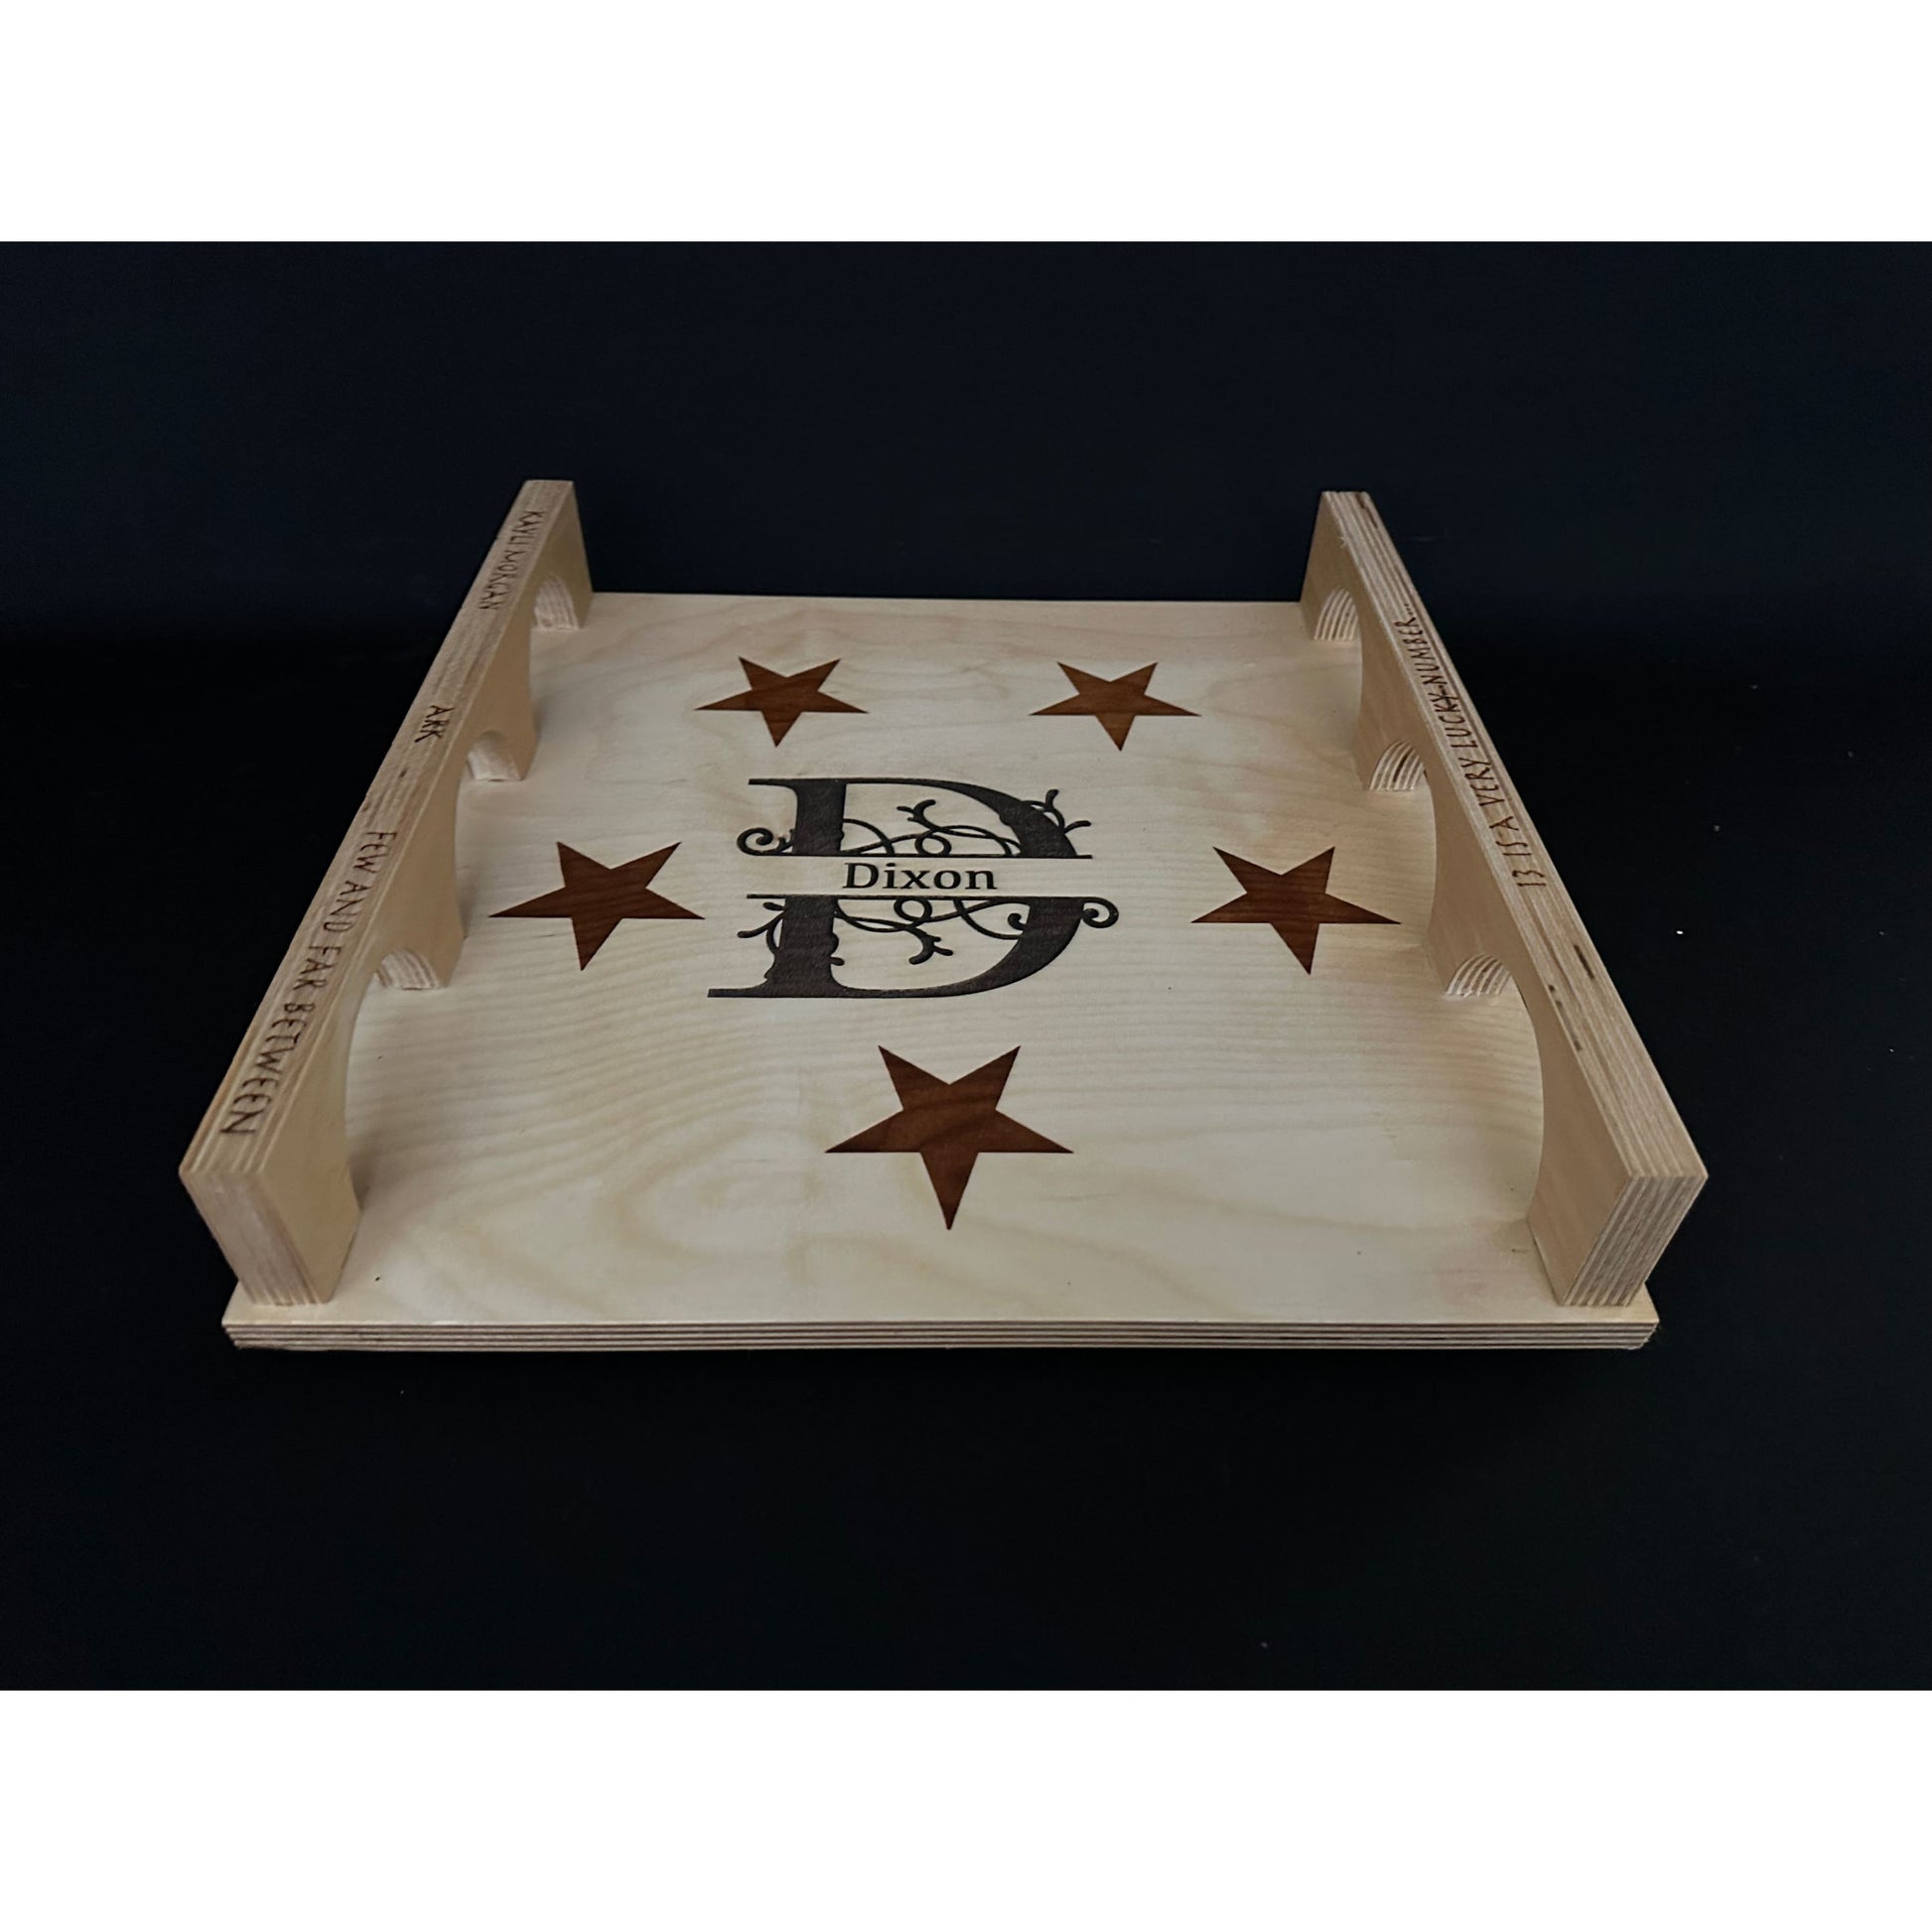 Serving Tray_Trivet_Cheese Slicer_Commissioned Designs